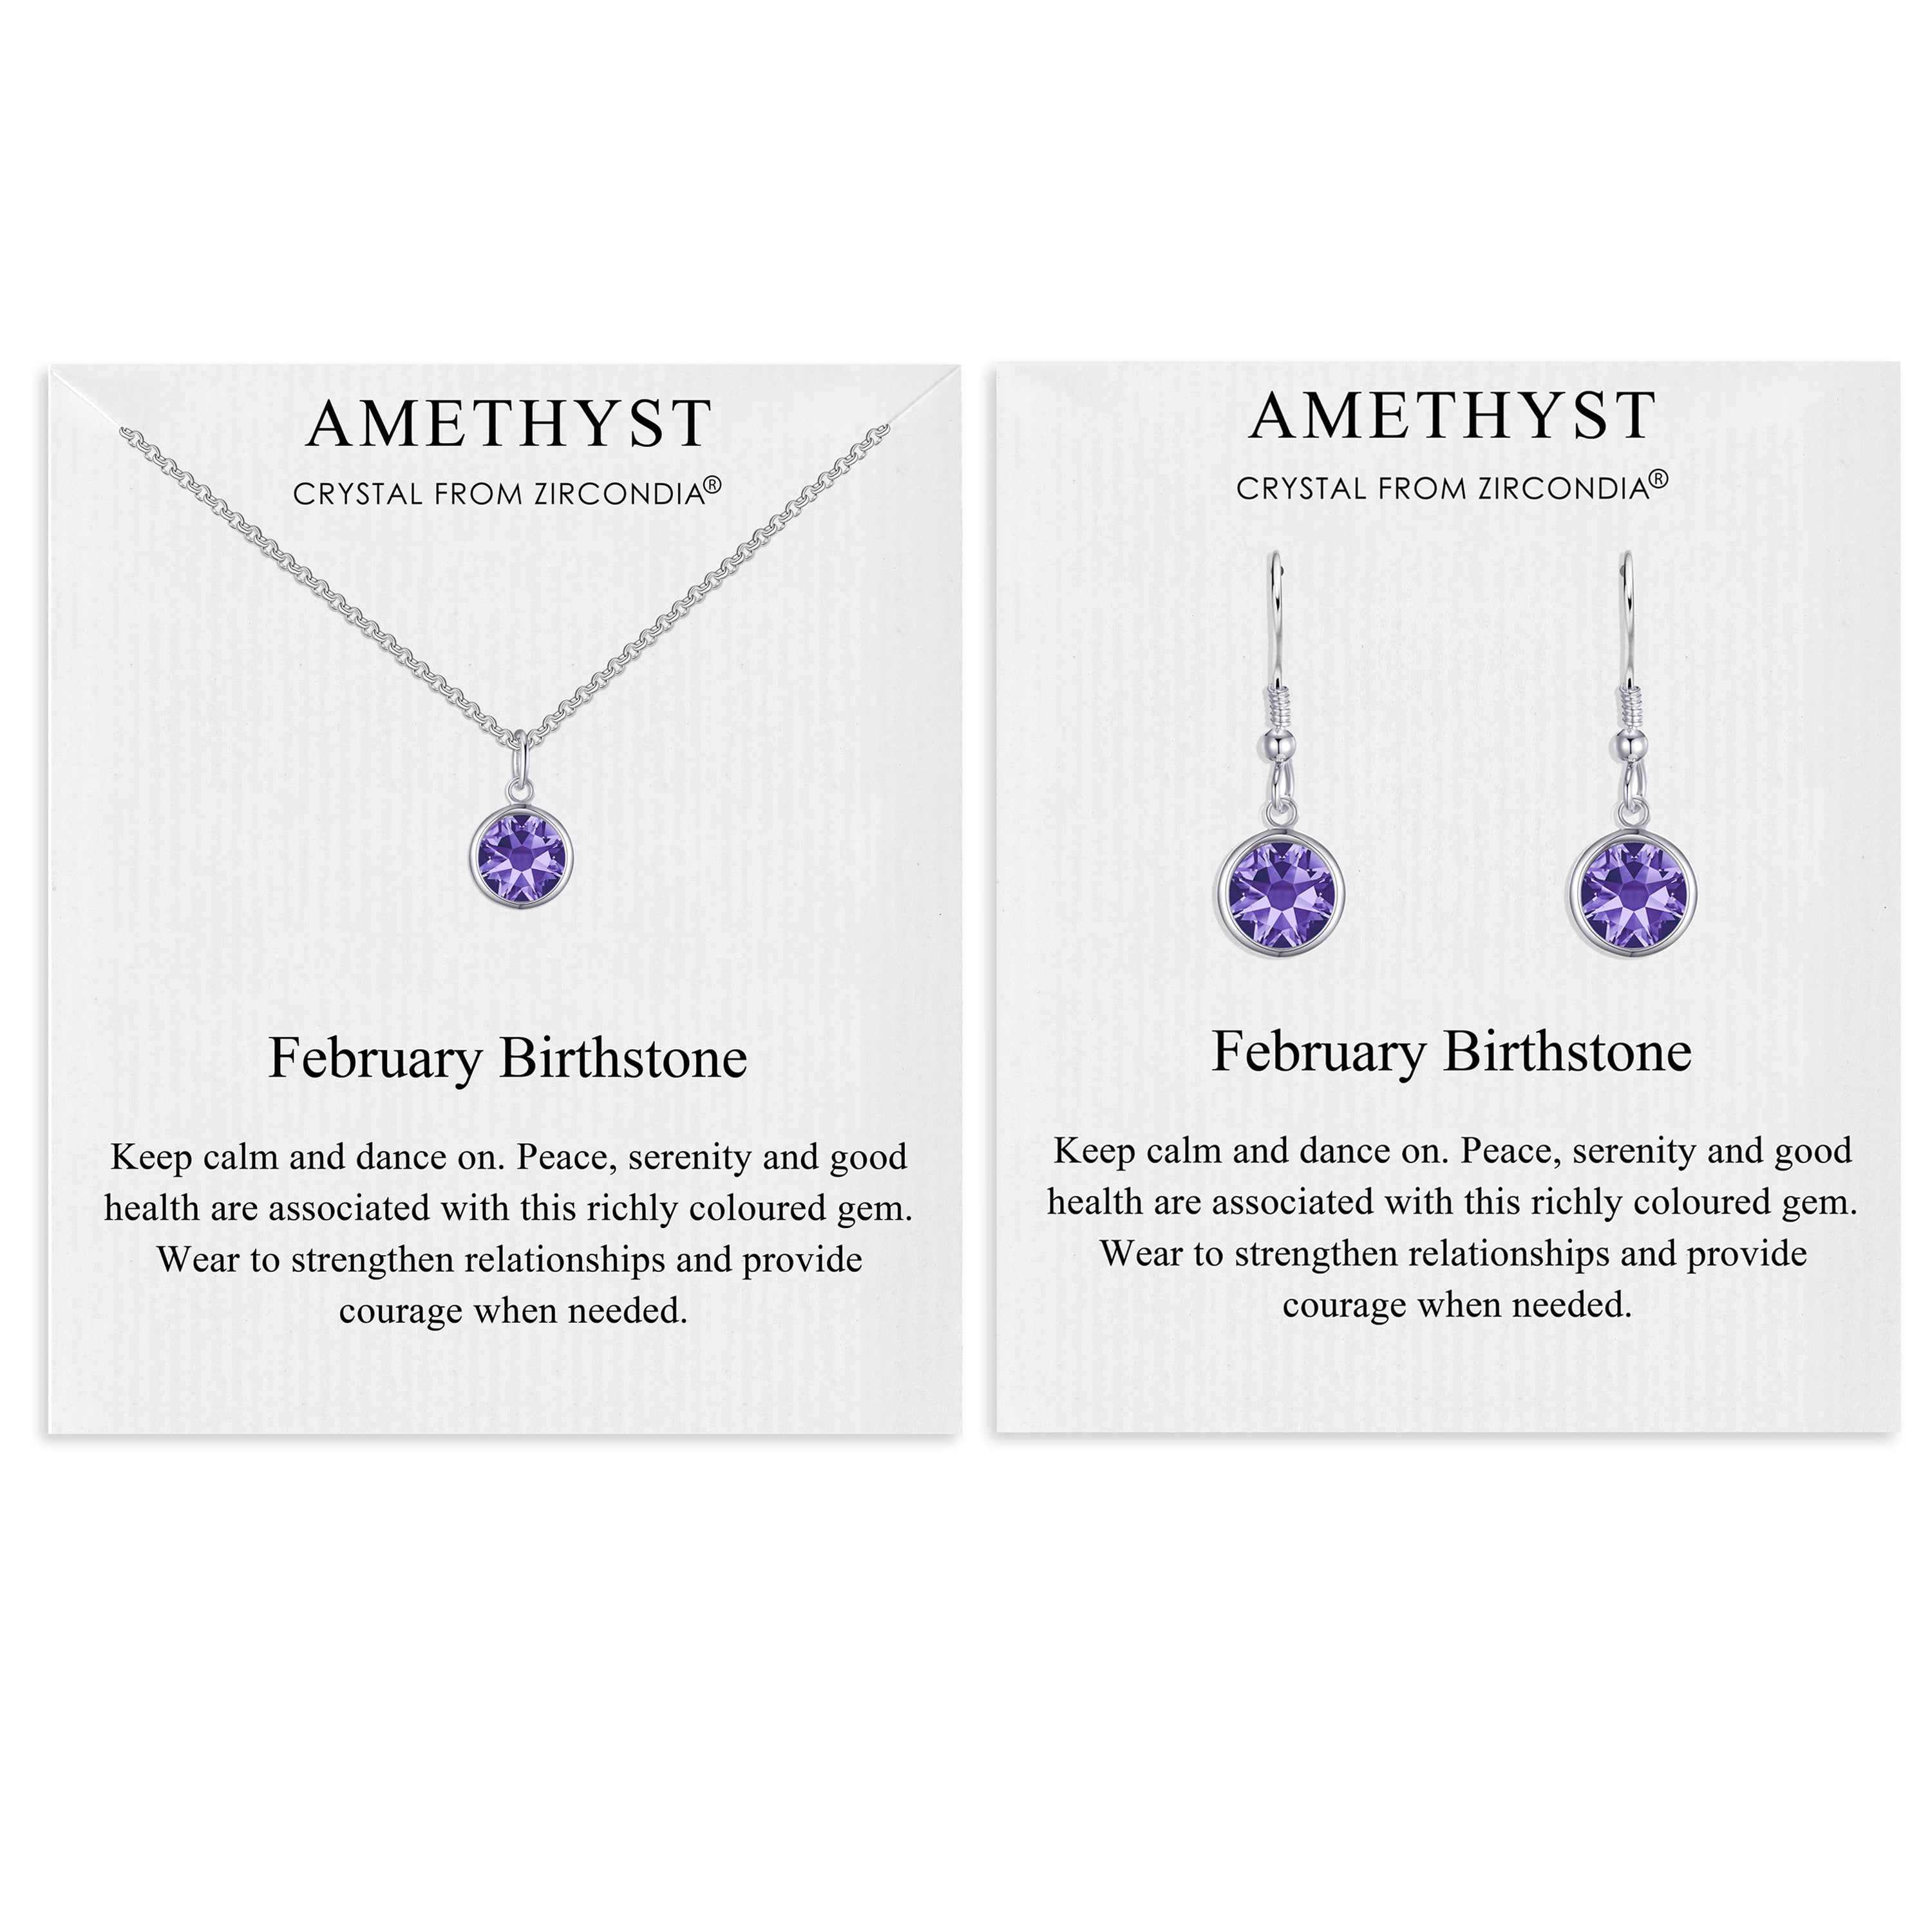 February (Amethyst) Birthstone Necklace & Drop Earrings Set Created with Zircondia® Crystals by Philip Jones Jewellery